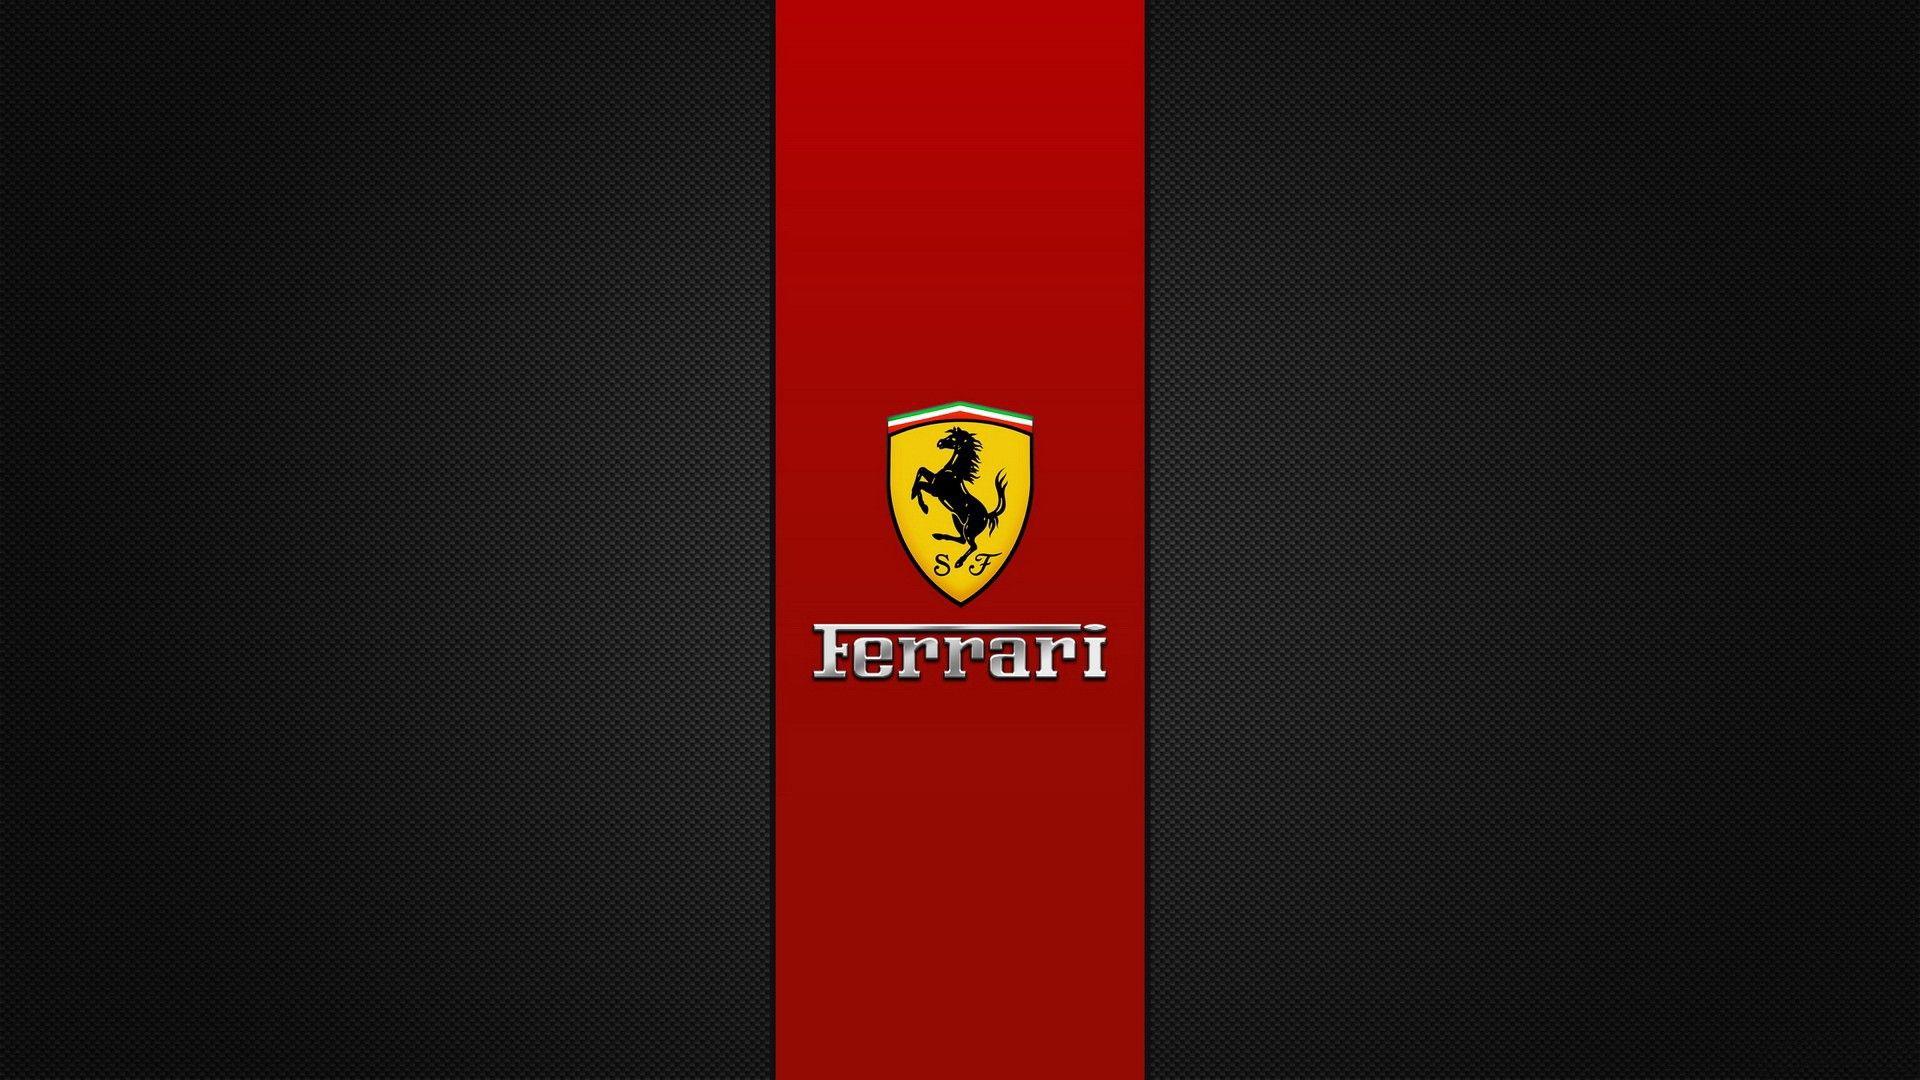 Ferrari's new hybrid supercar will debut at the end of May - CNET